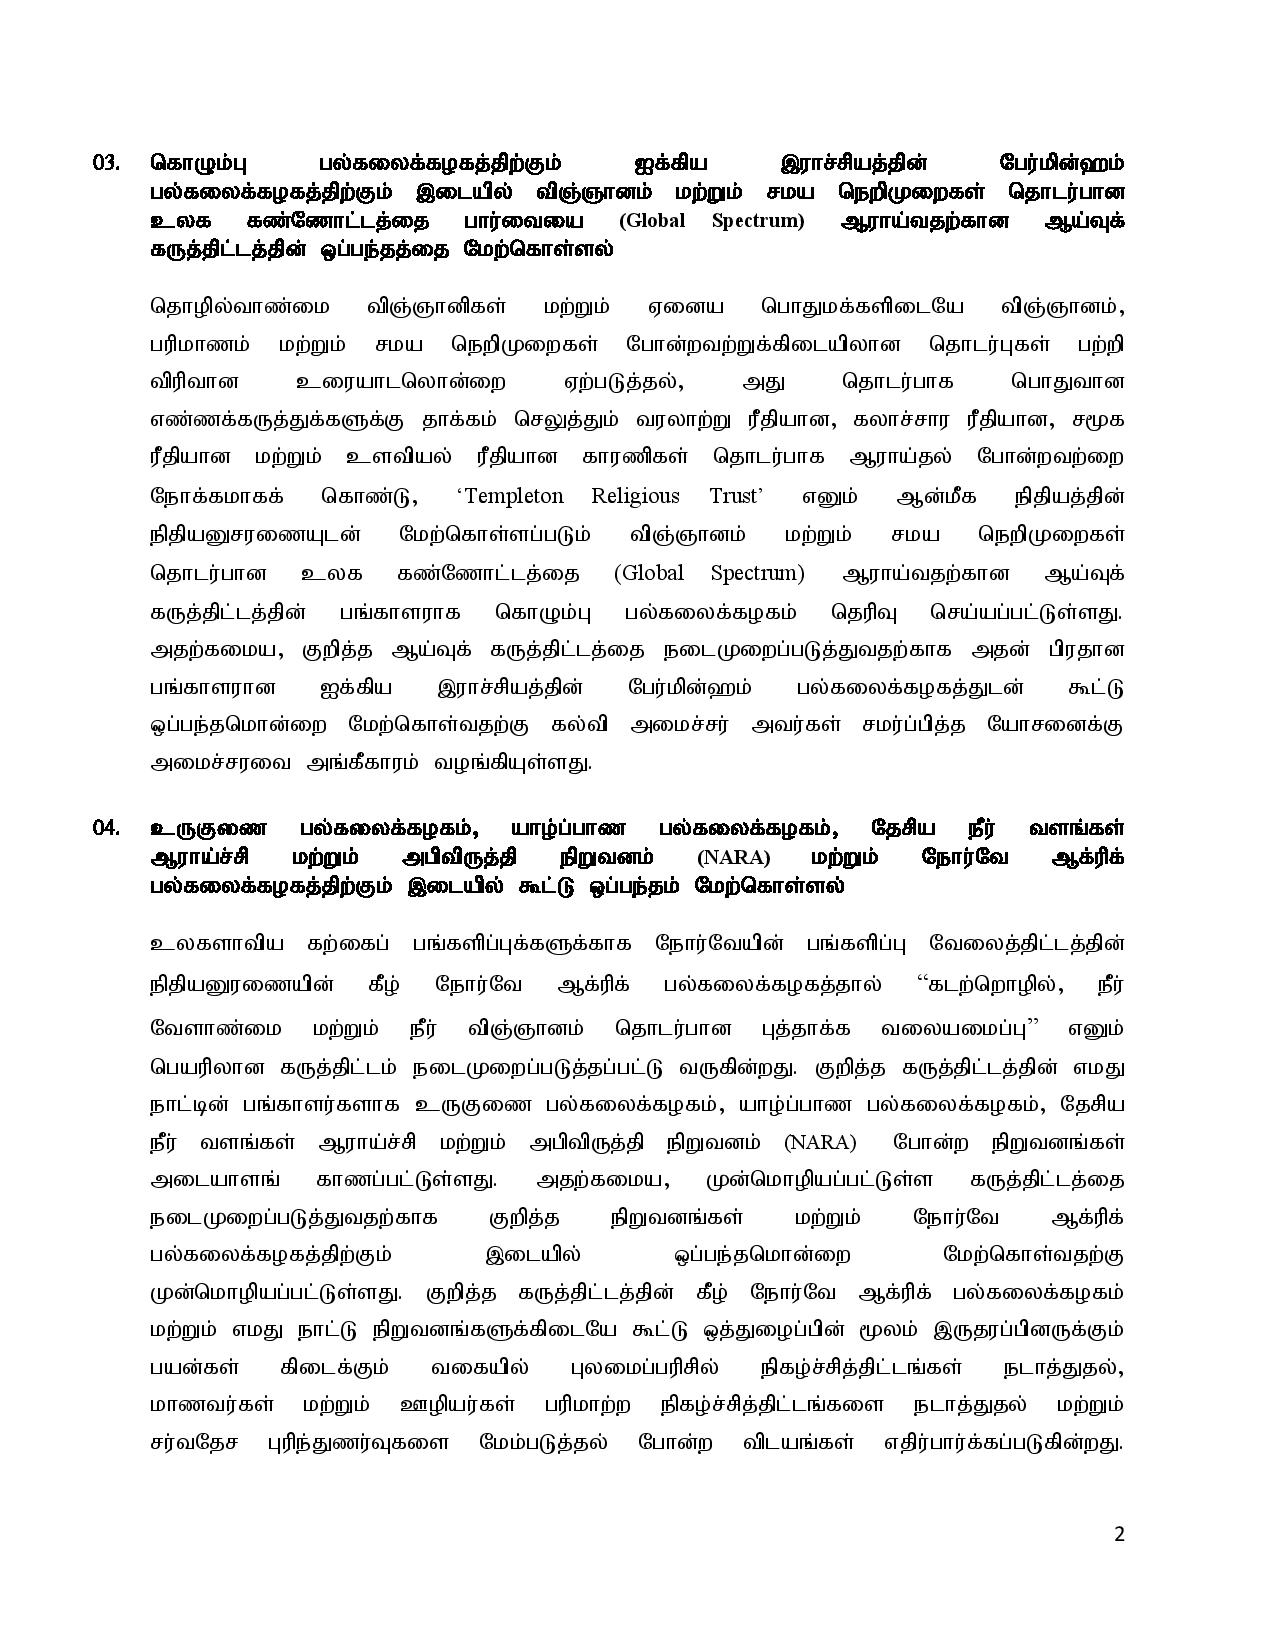 Cabinet Decisions on 02.08.2021 Tamil page 002